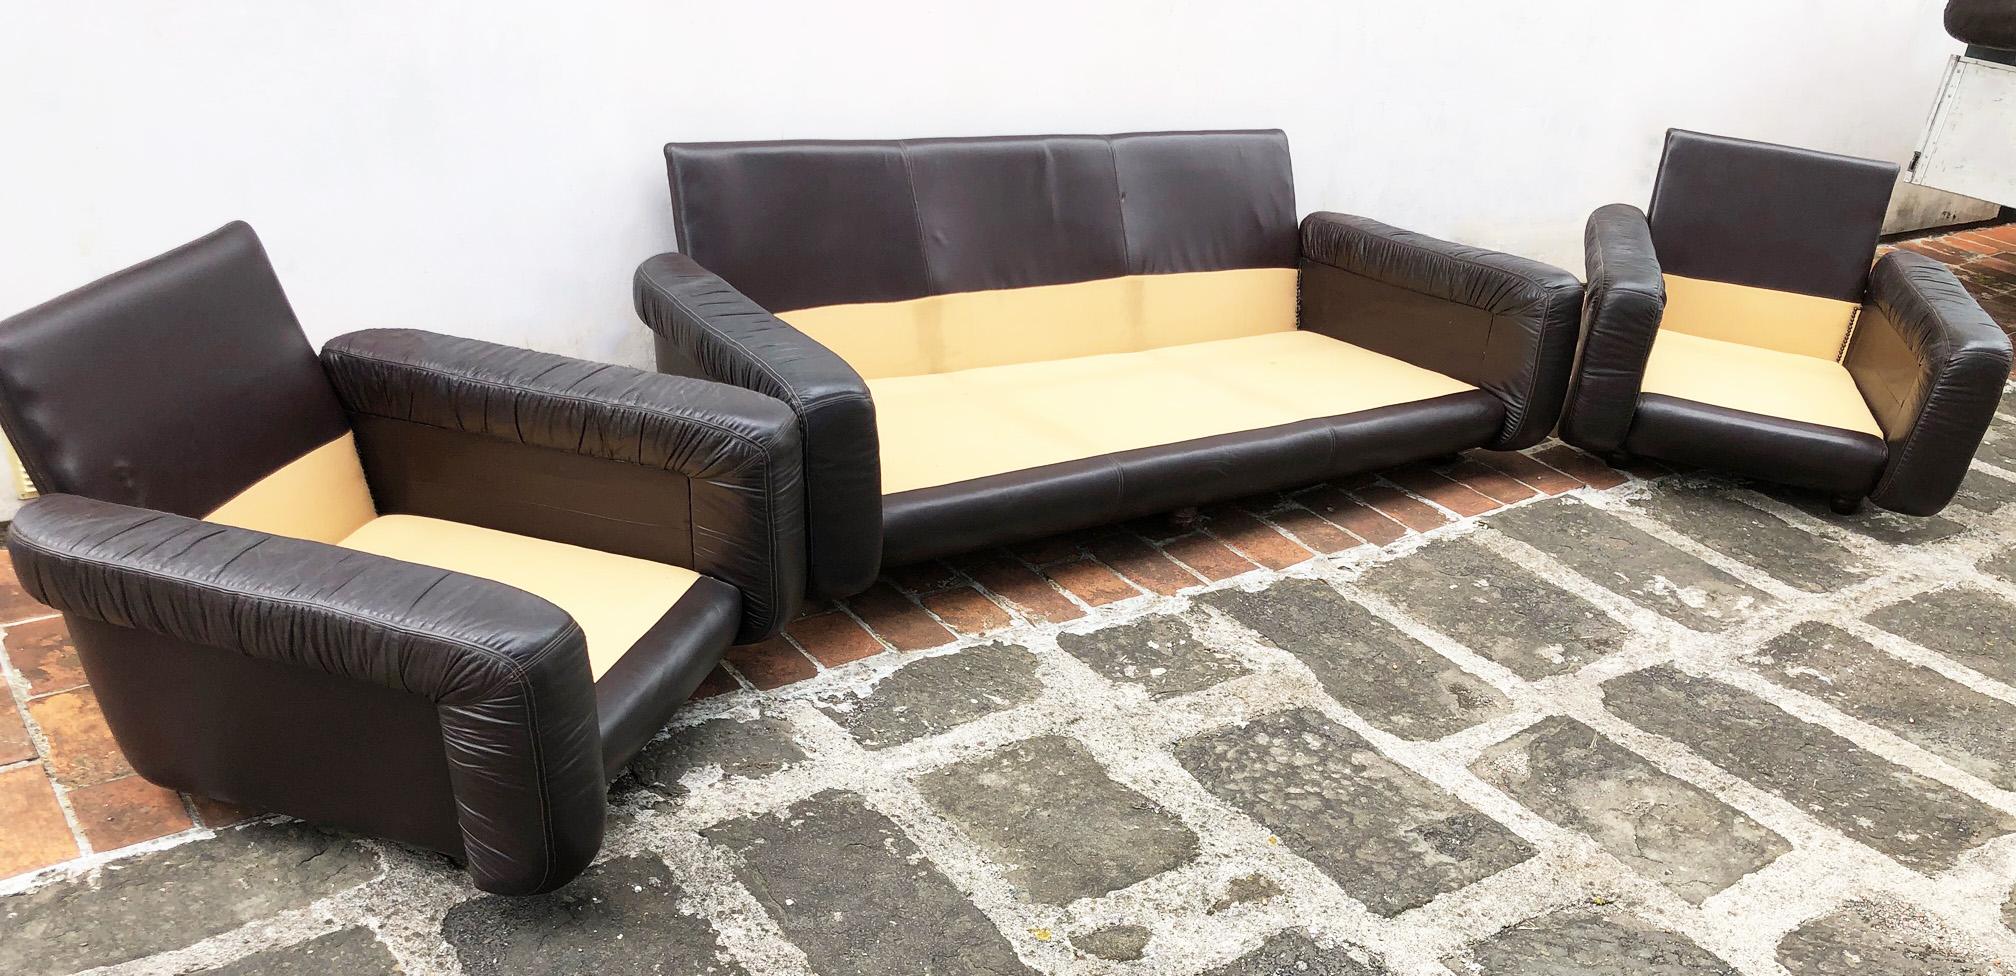 1970s Italian brown leather sofa and armchairs, very comfortable and deep.
Particular design
Coming from a seaside villa in Castiglion Della Pescaia
Dimensions of the armchair: 98 D x 94 W x 76 H
Sofa dimensions: 98 D x 215 W x 76 H.
As shown in the